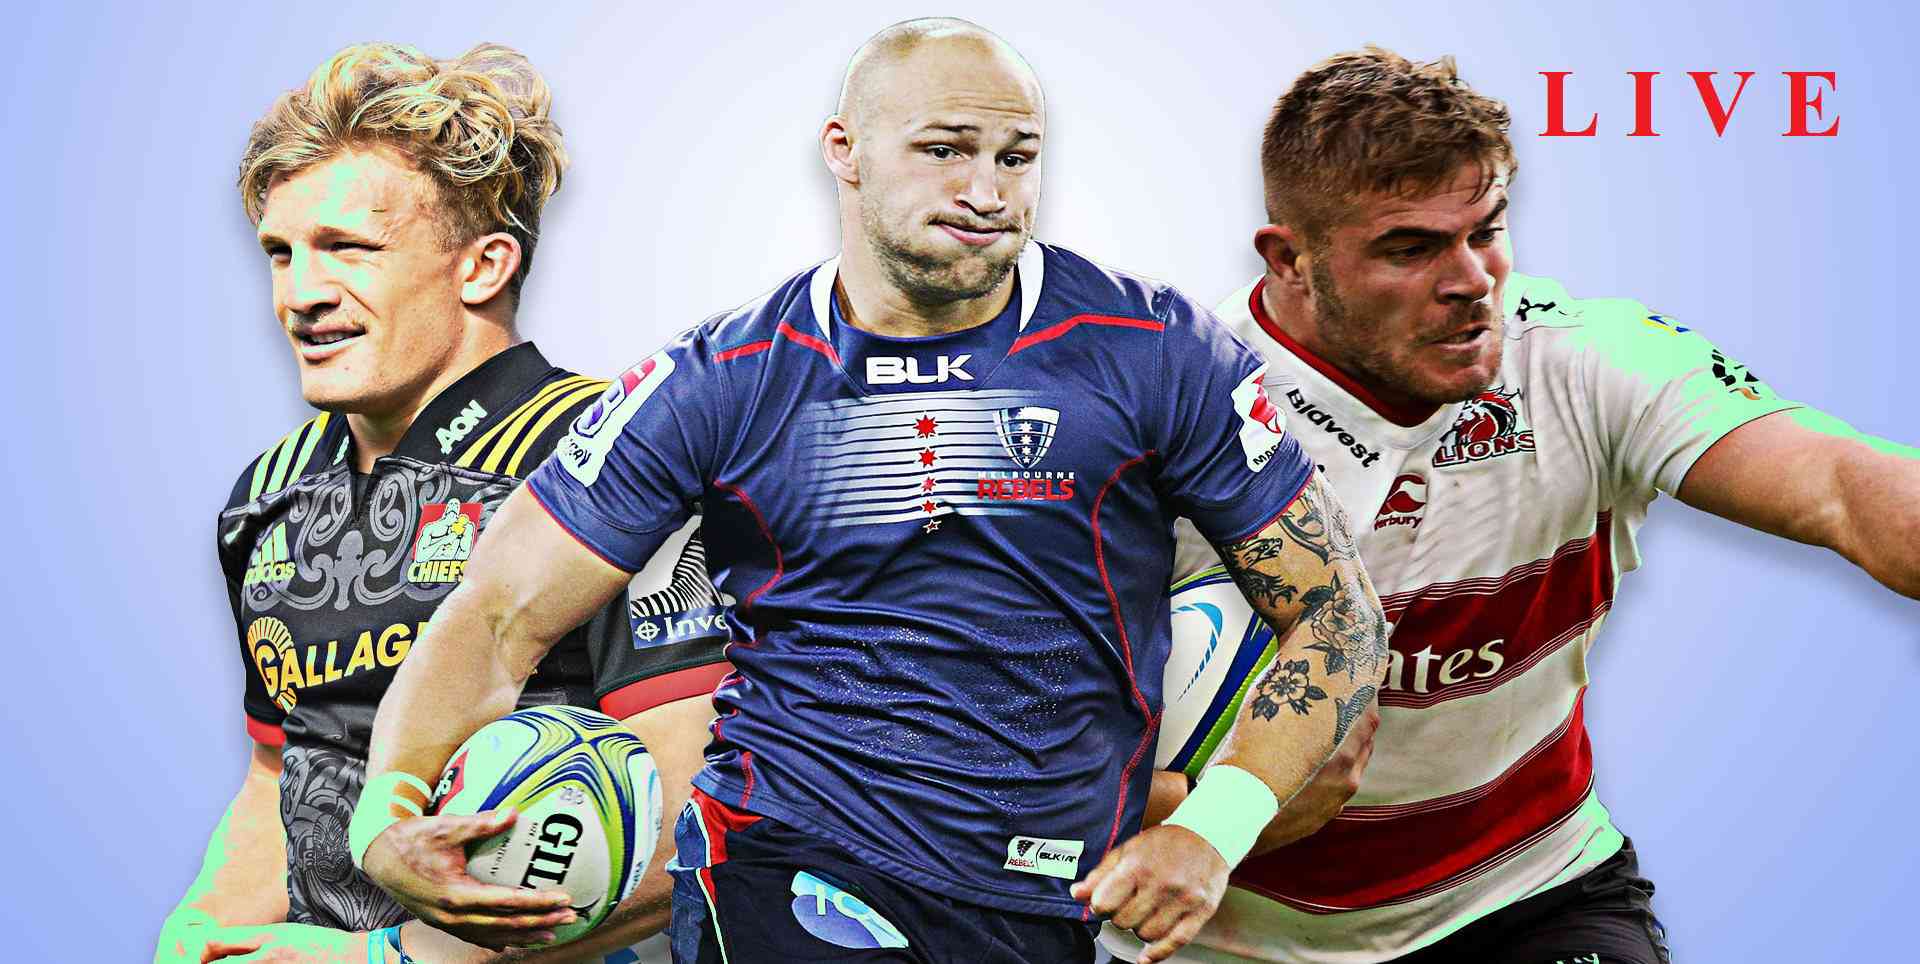 Cheetahs Vs Pumas Full Rugby Matches Live Online